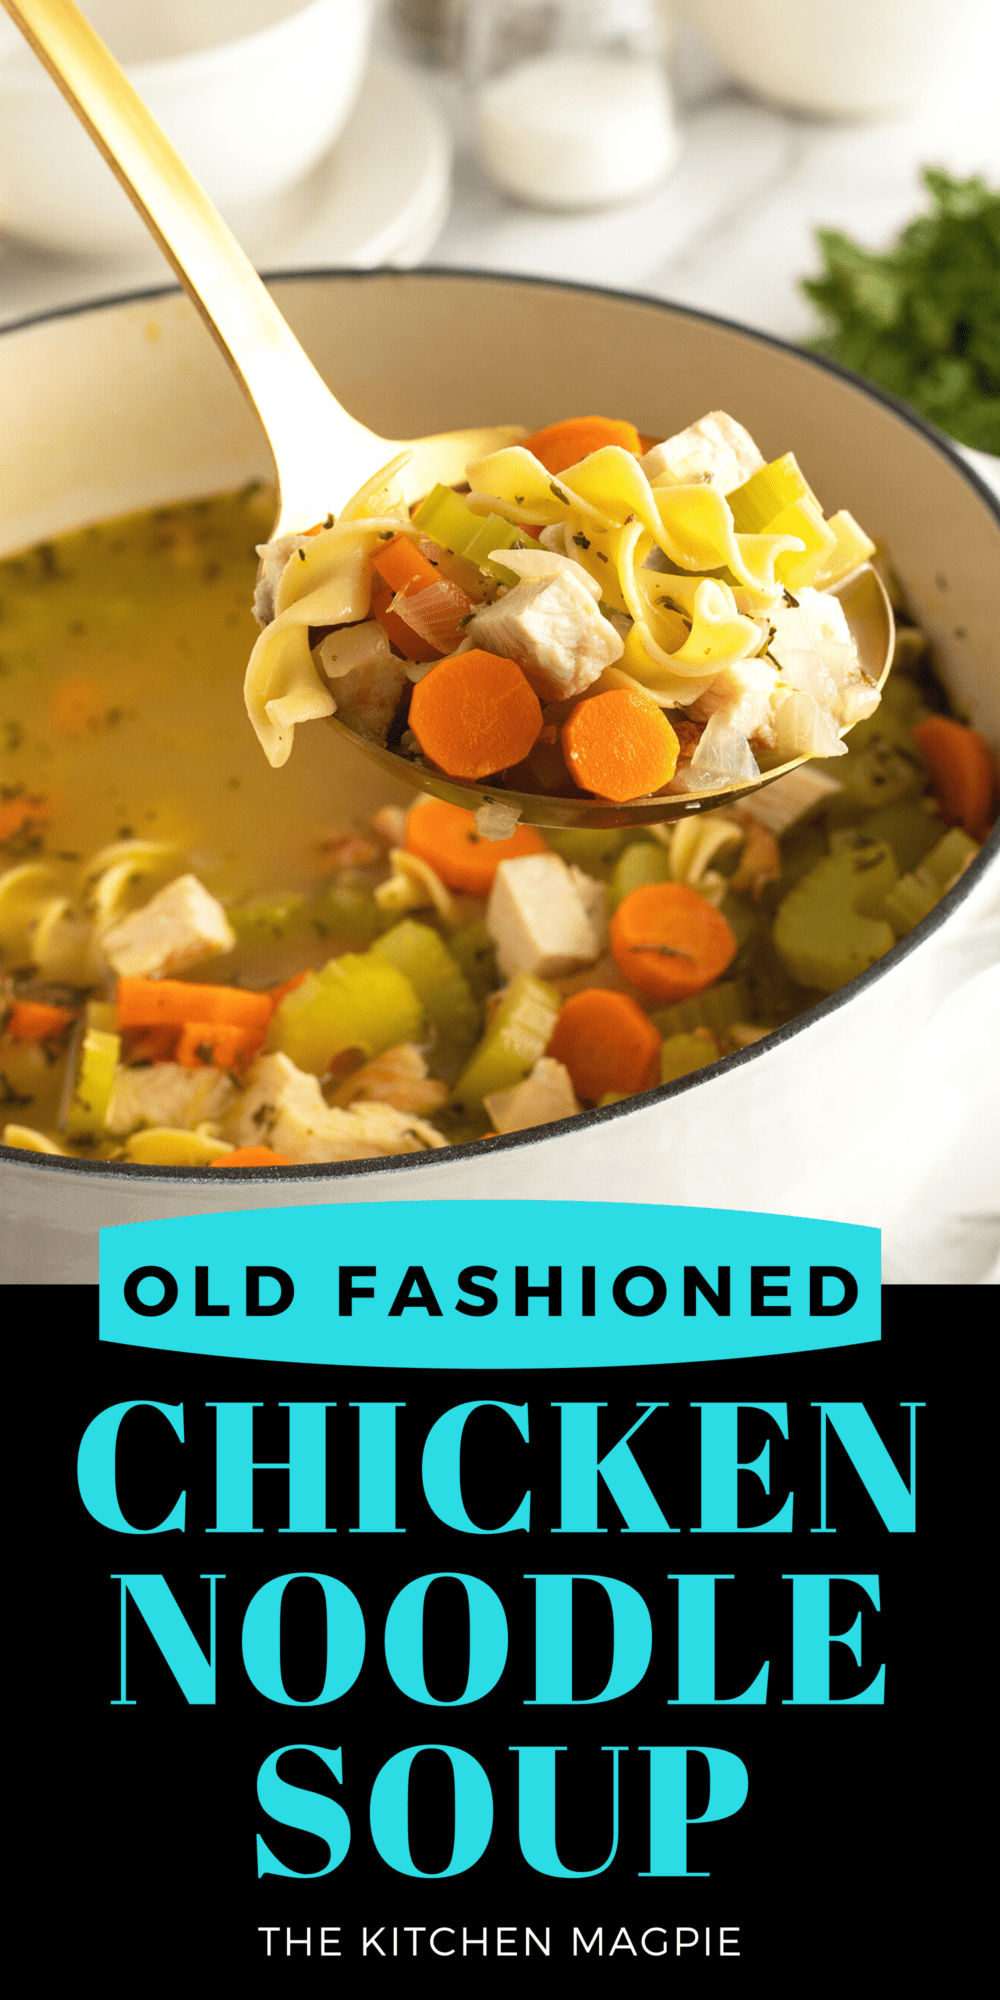 This simple chicken noodle soup manages to pack a lot into just one bowl. It’s cozy, healthy, filling, and requires very little time in the kitchen.